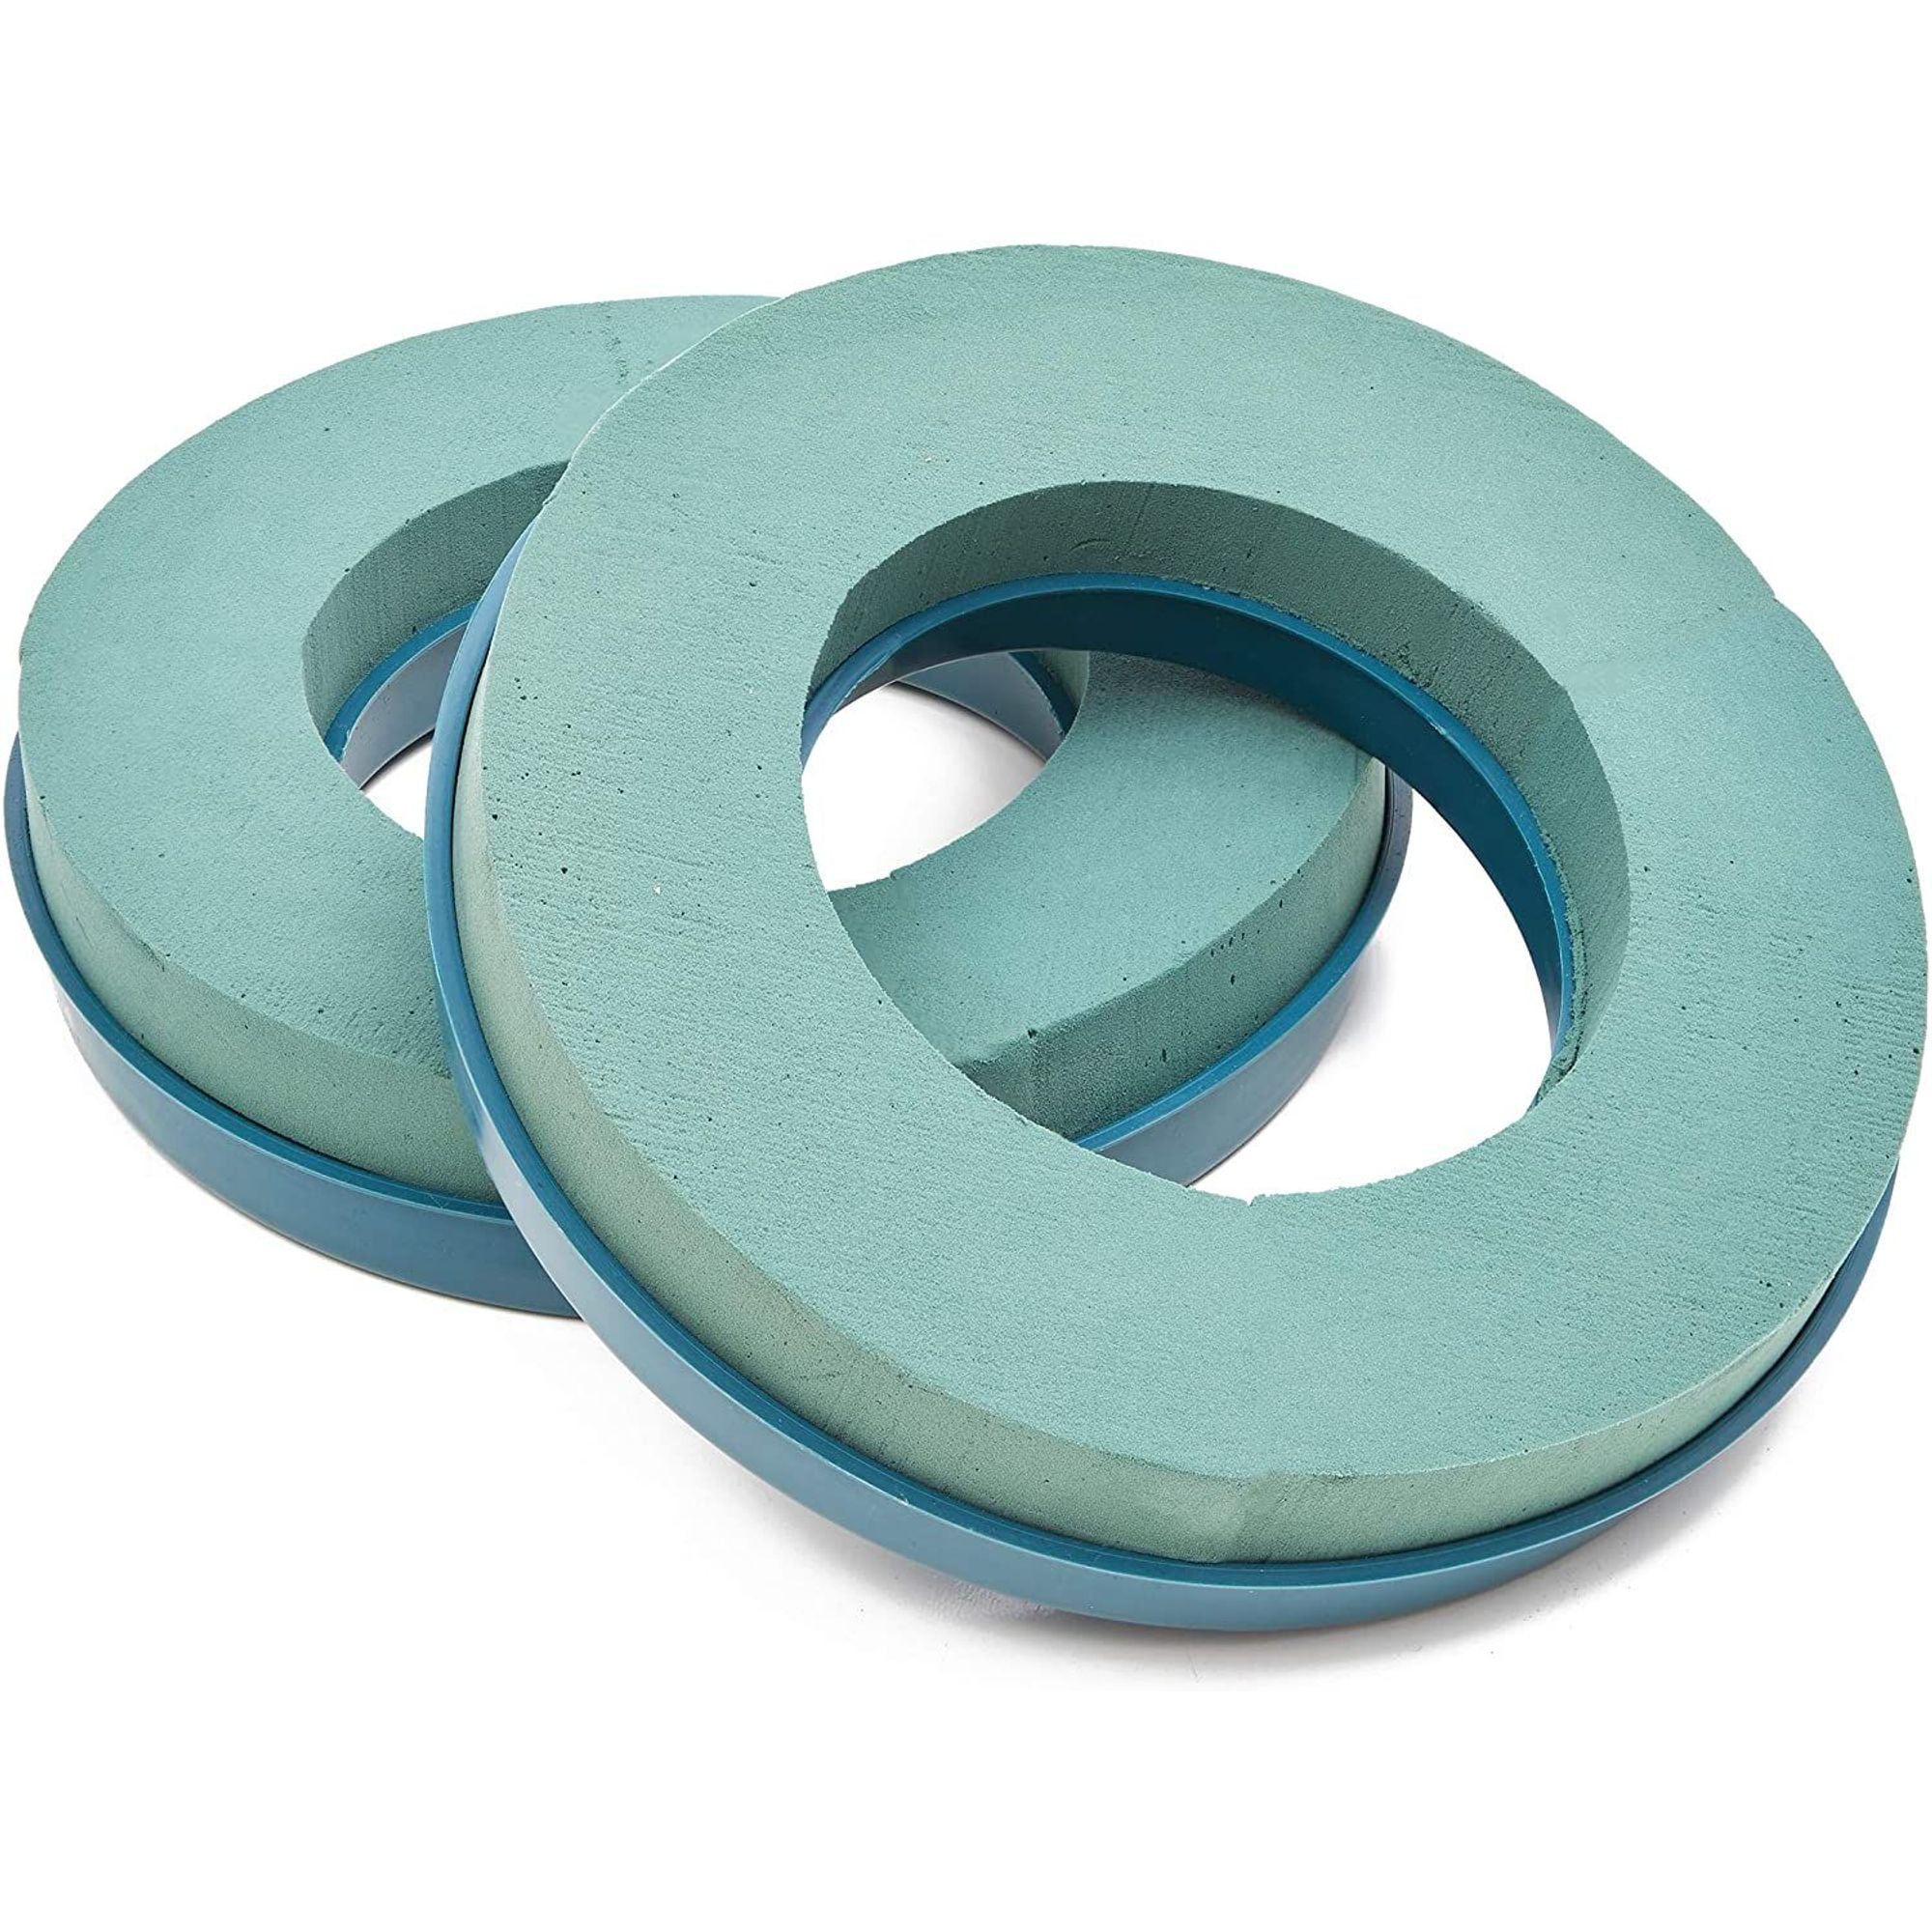 2 Pack Wet Floral Foam with Wreath Ring for Fresh Flower Arragements